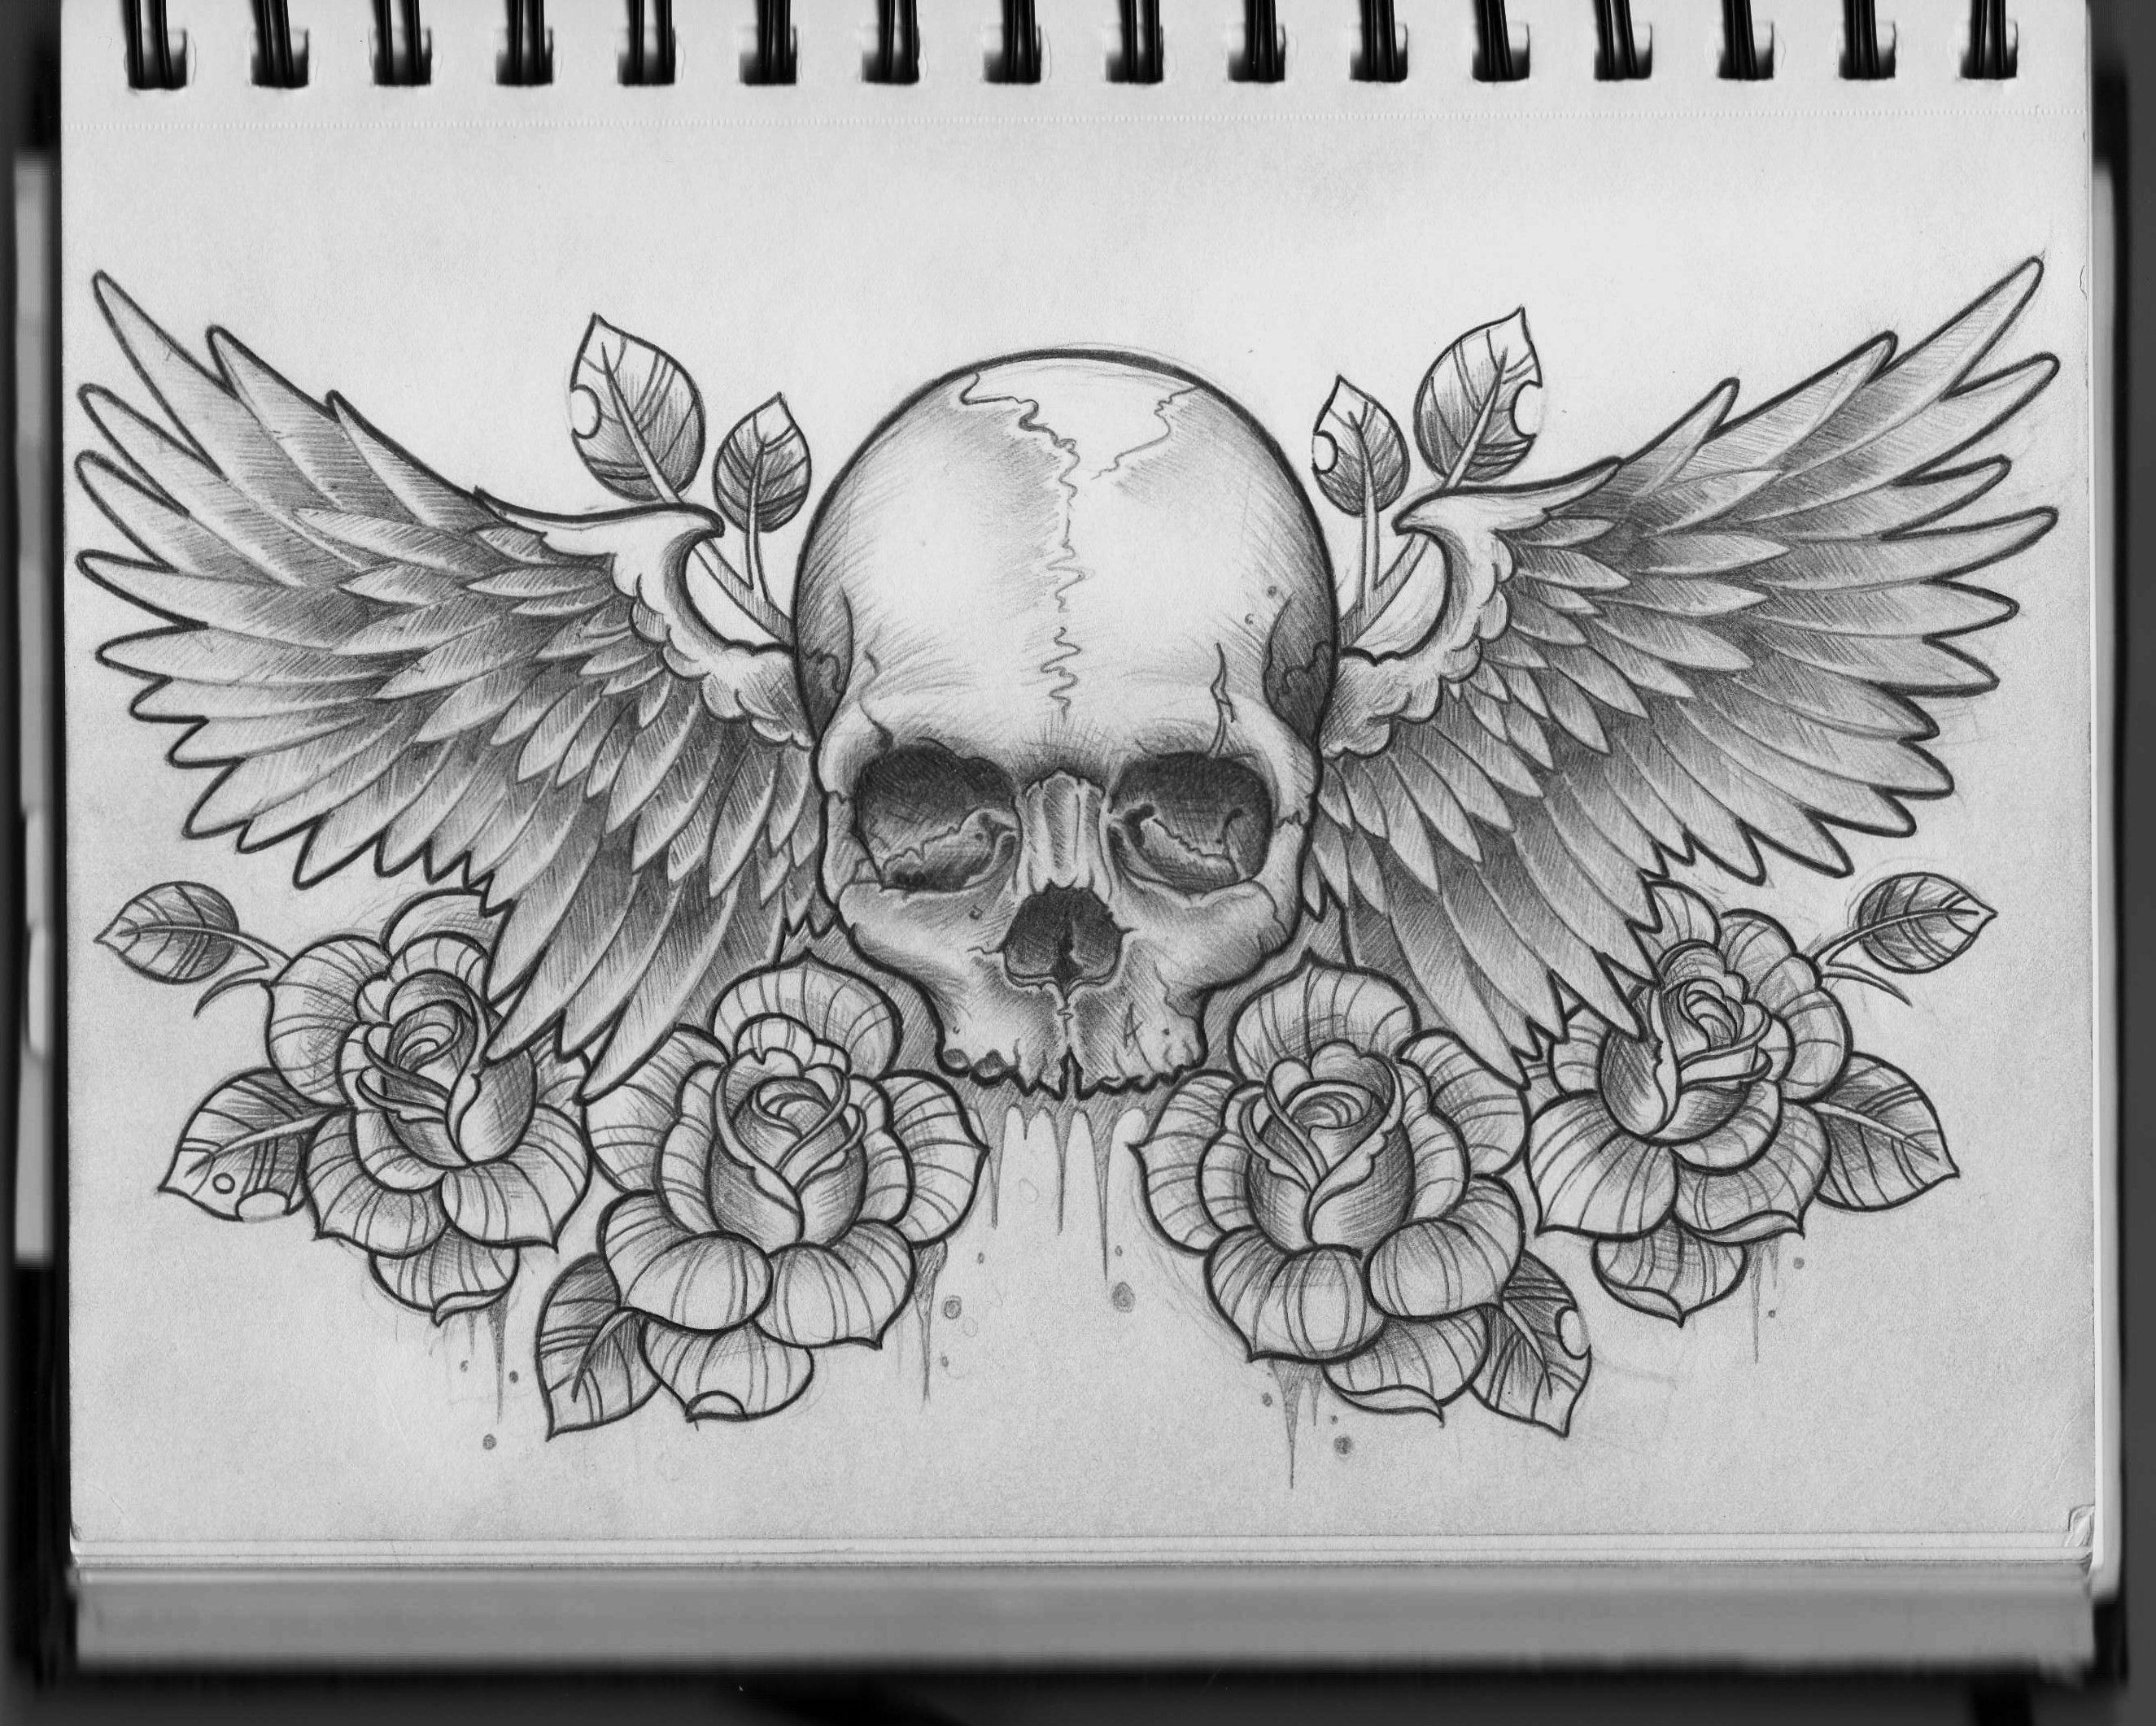 Skull And Wings Chest Design Ink Filigree Tattoo Tattoos Chest within size 2650 X 2122